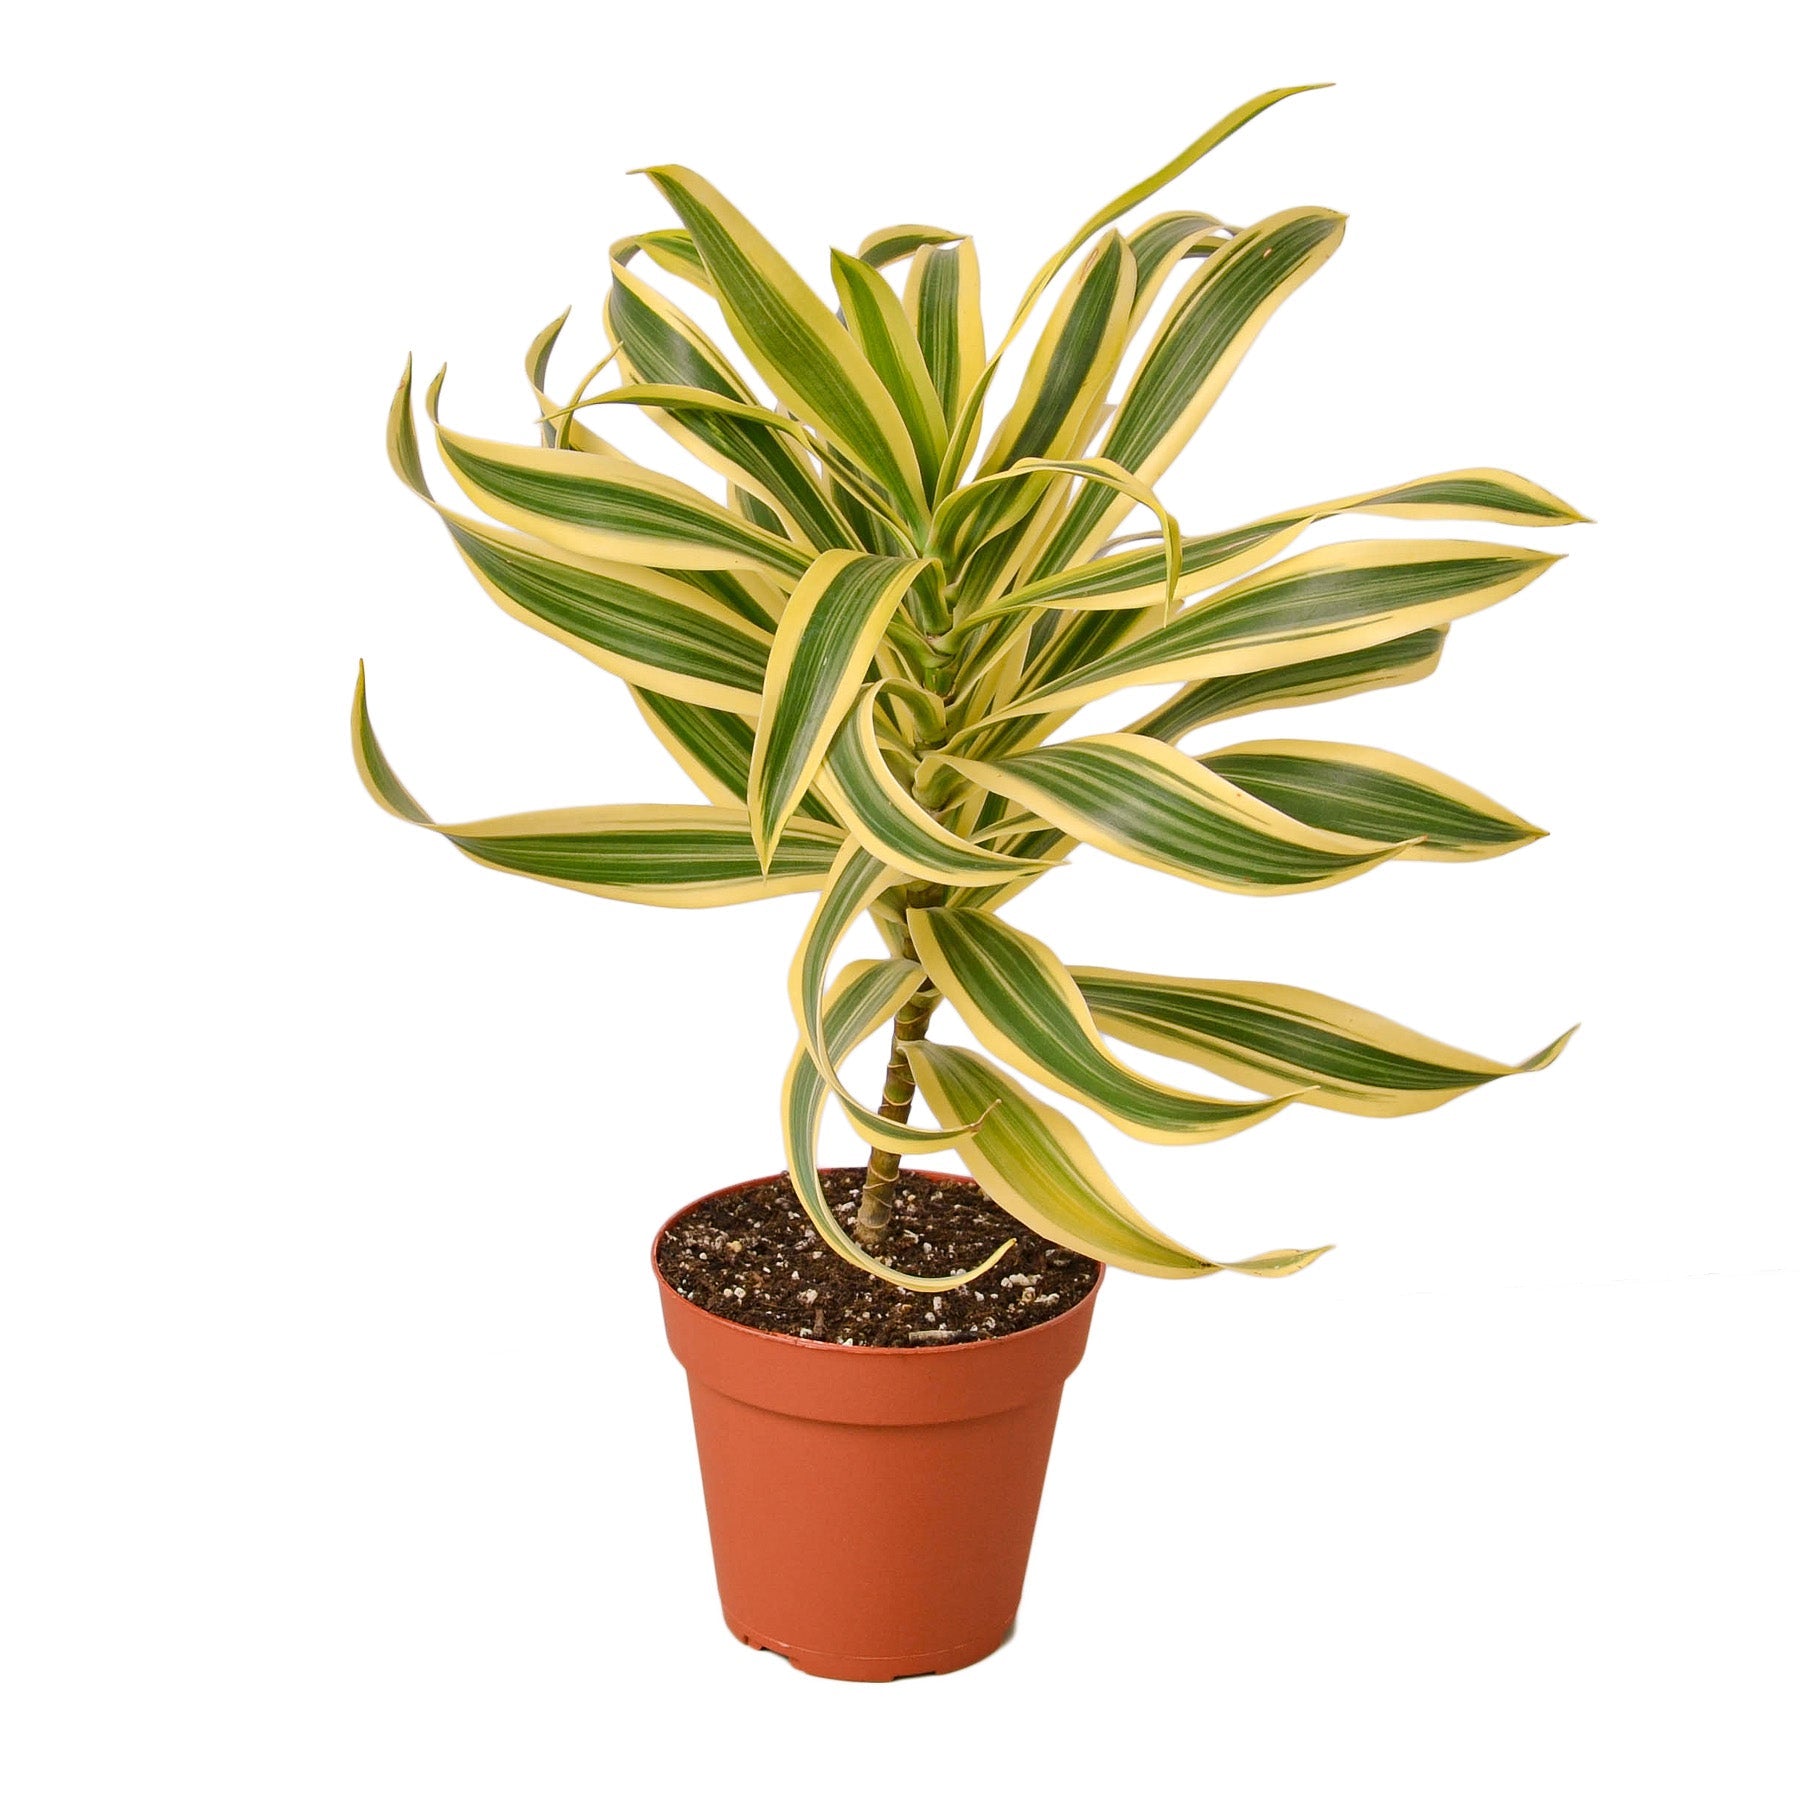 A potted plant with yellow and green stripes available at the best garden center near me.